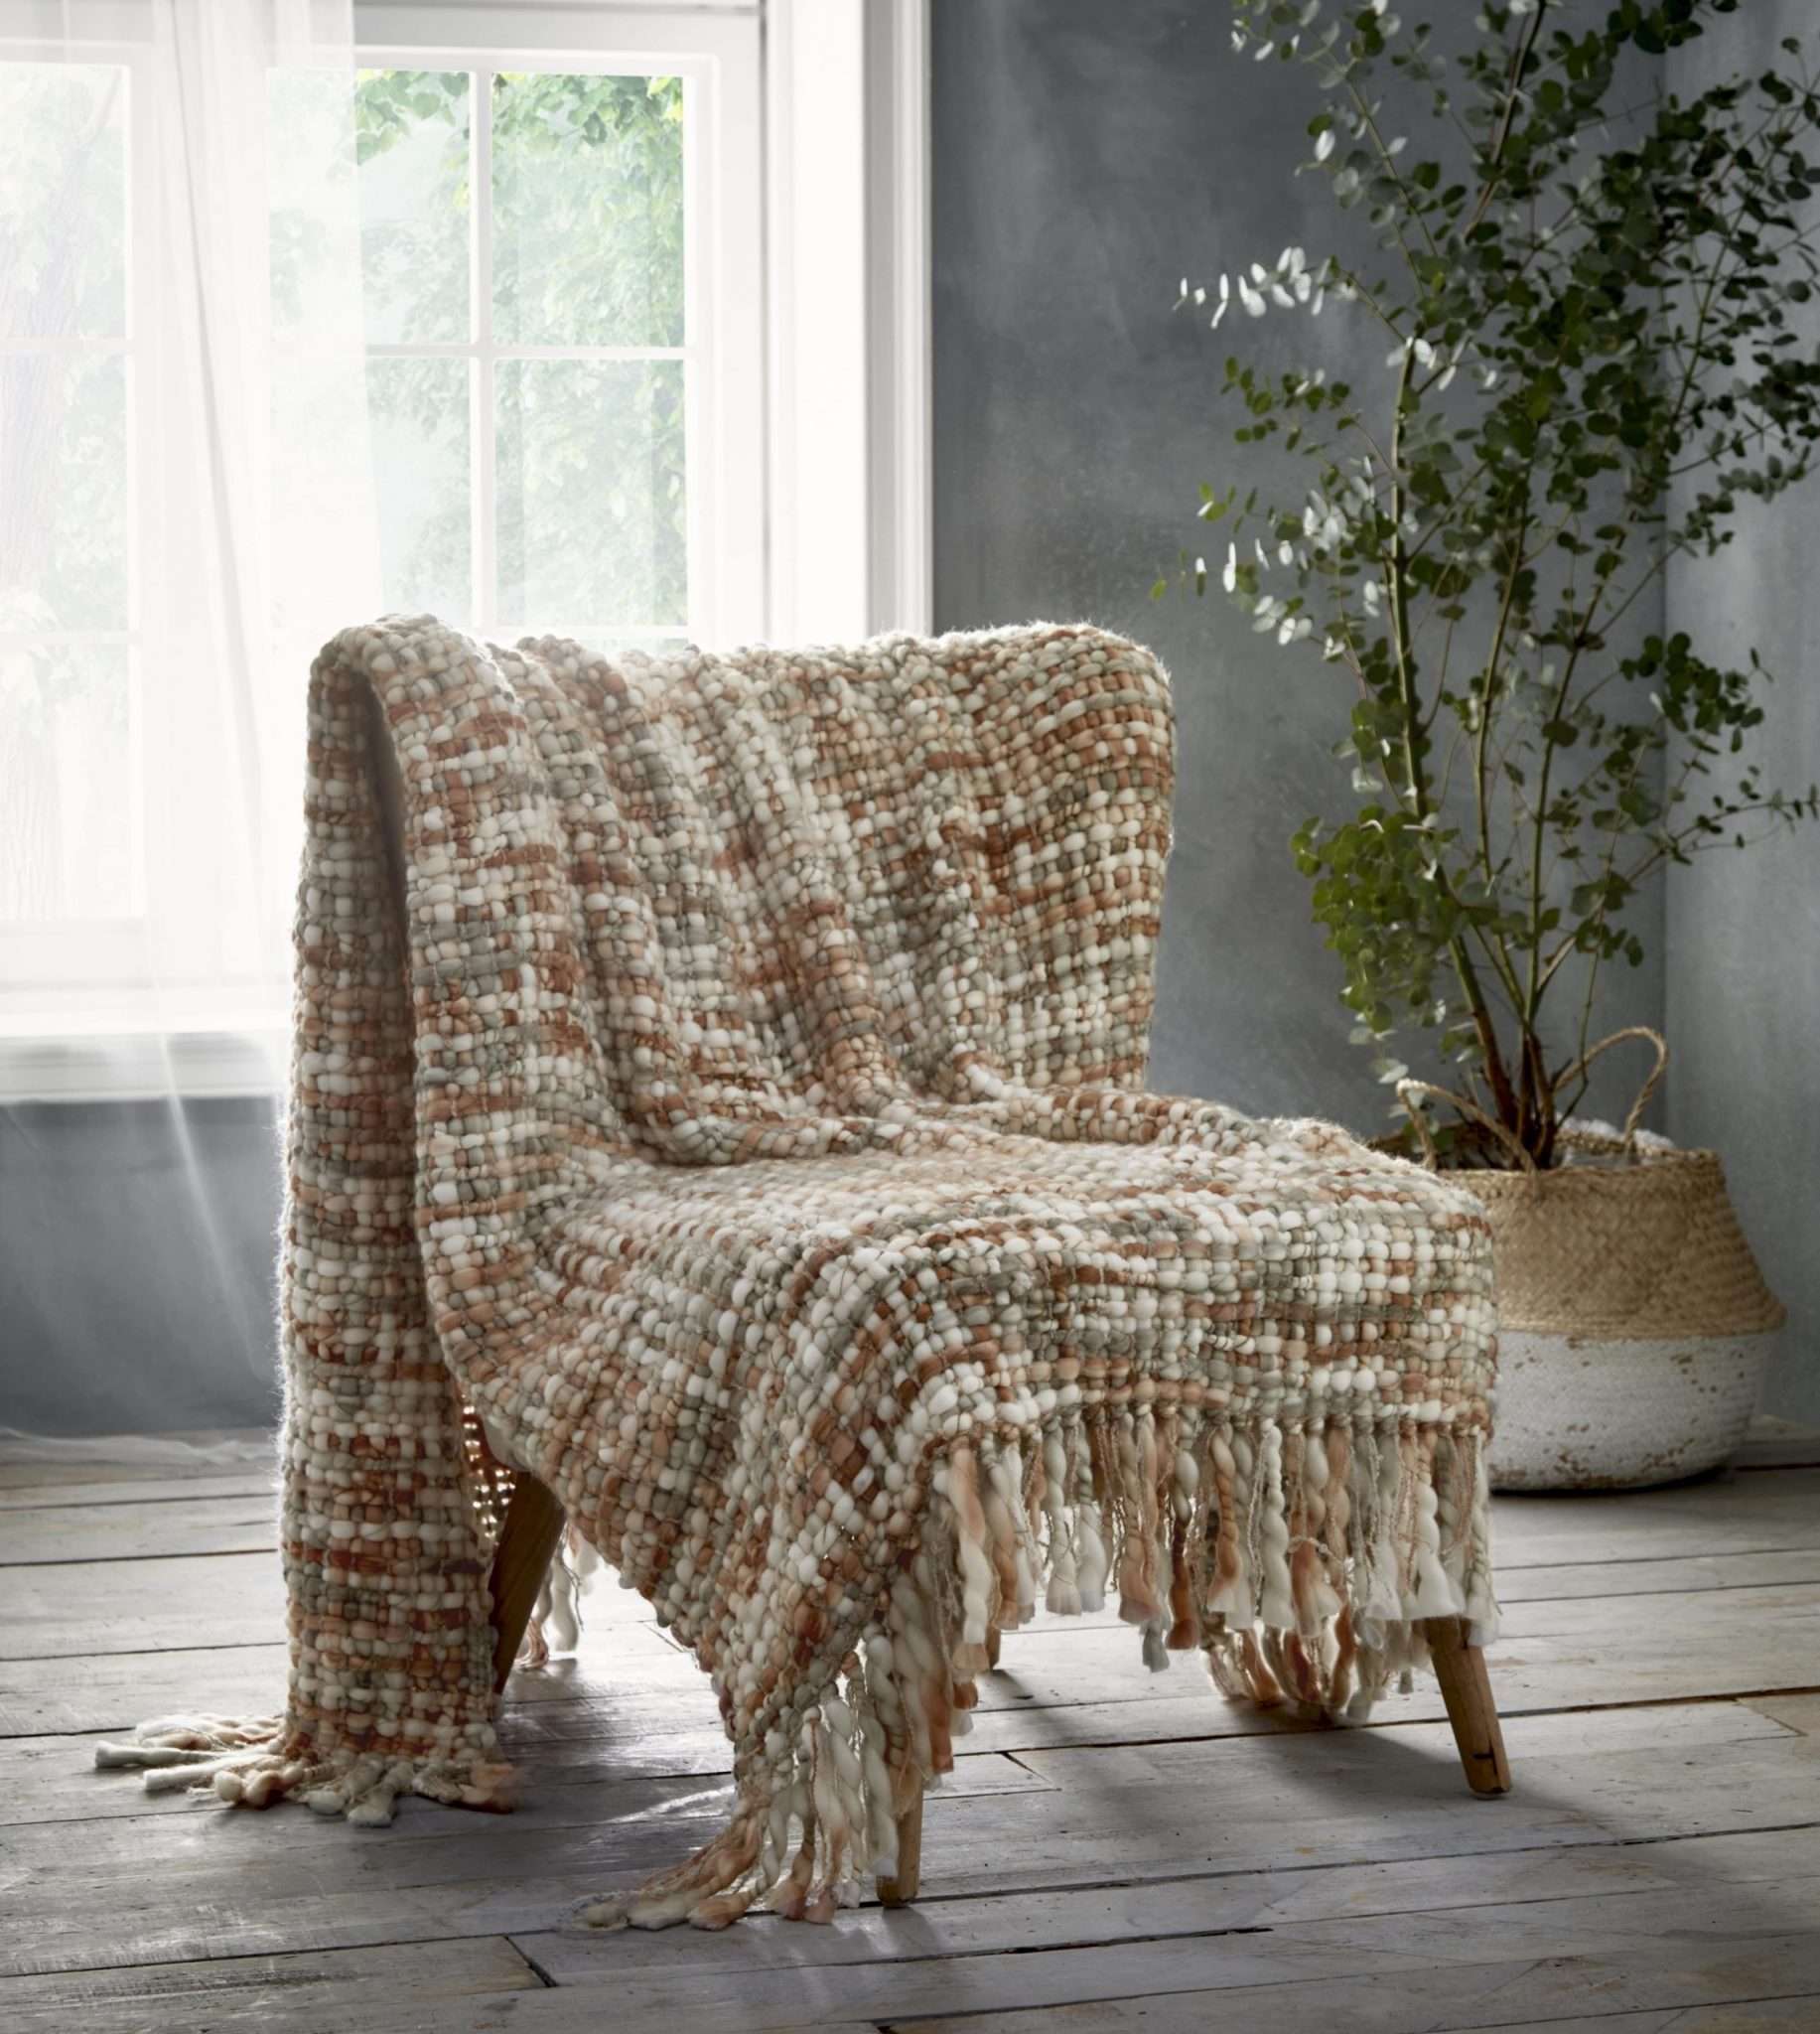 MARLEY TERRACOTTA THROW no usm min scaled scaled